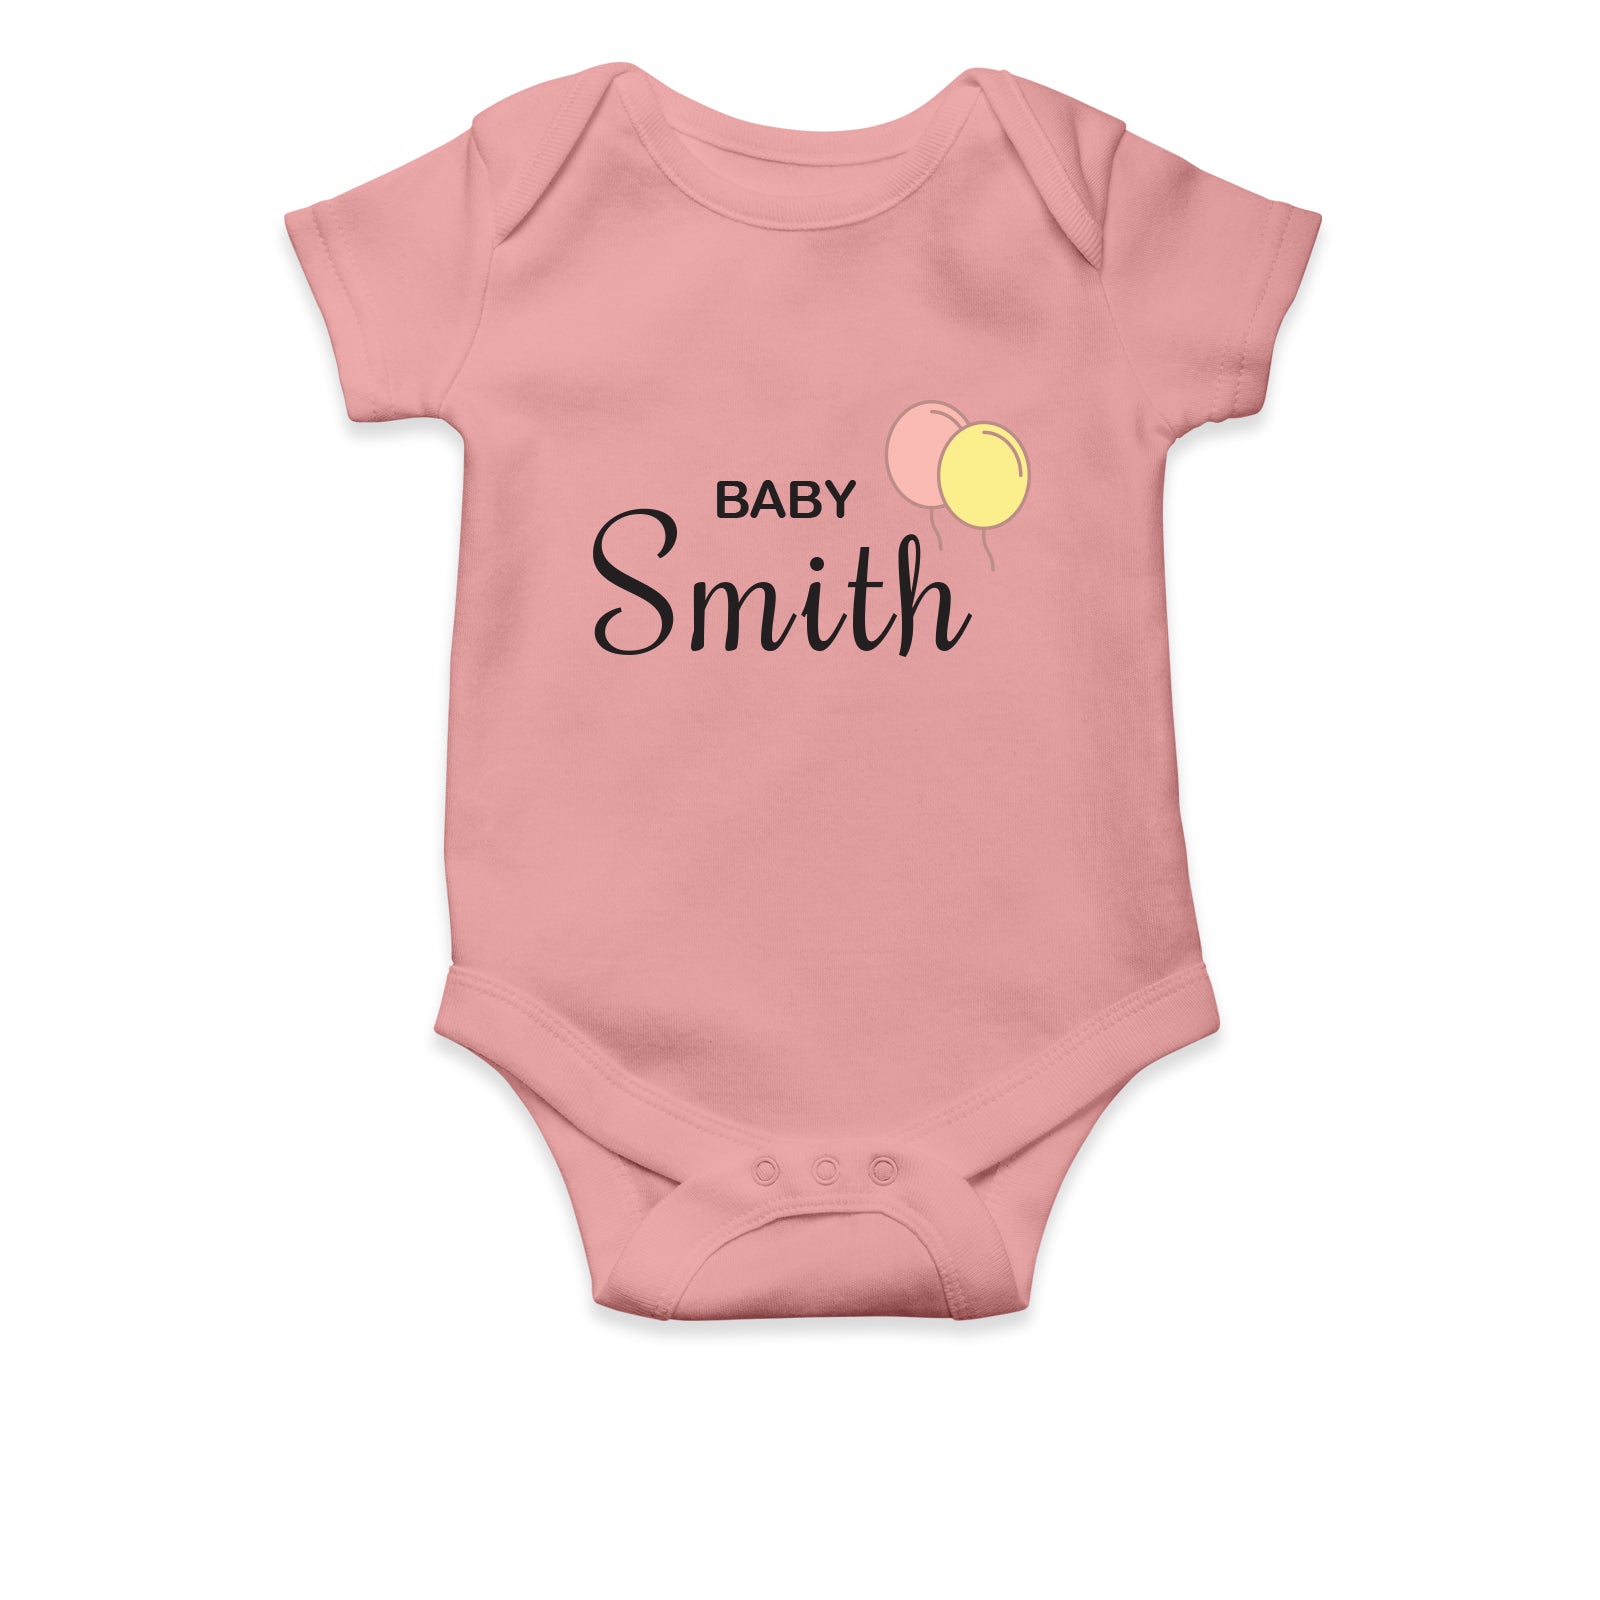 Personalised White Baby Body Suit Grow Vest - Red Yellow Balloons